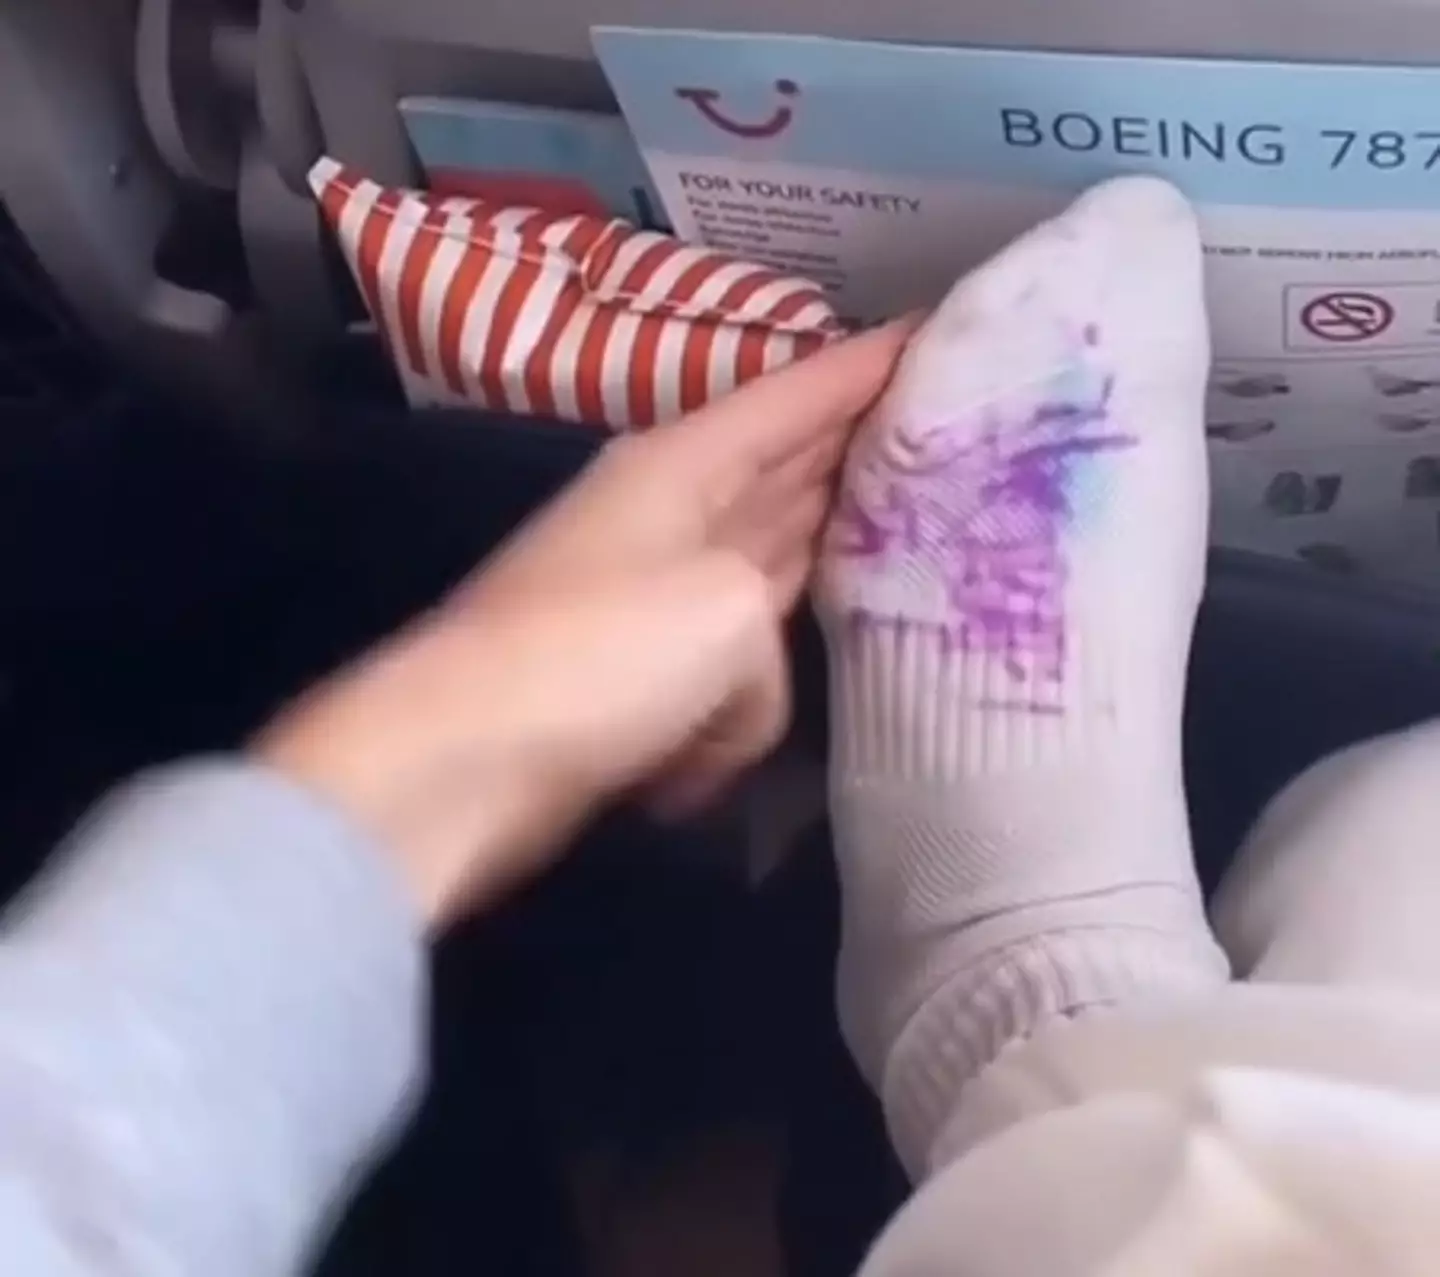 If you didn't want your socks to be a canvas then maybe don't take your shoes off.